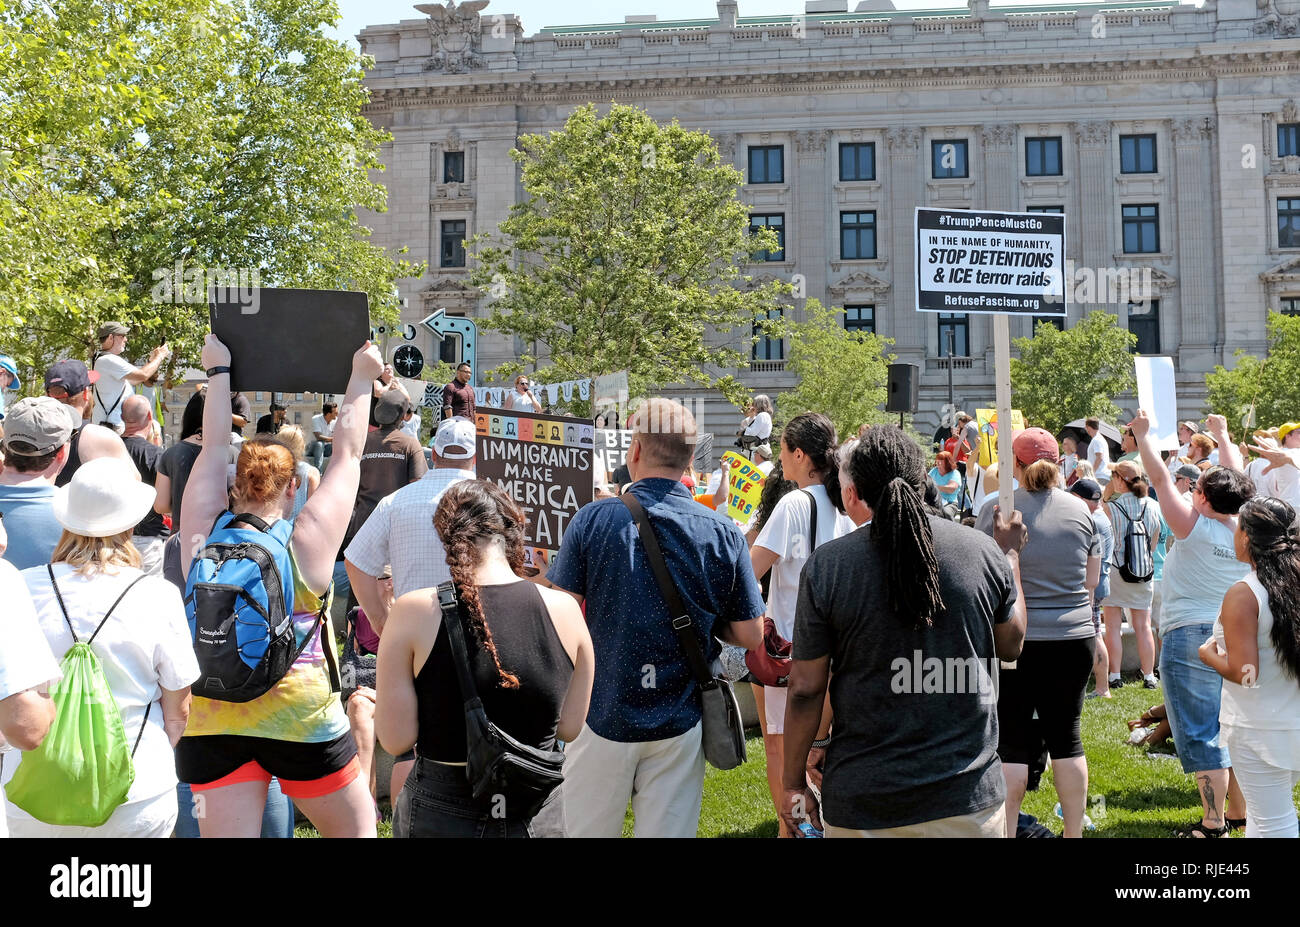 The Cleveland rally against immigration policies separating families on June 30, 2018 in Cleveland, Ohio is one of over 100 protests nationwide. Stock Photo